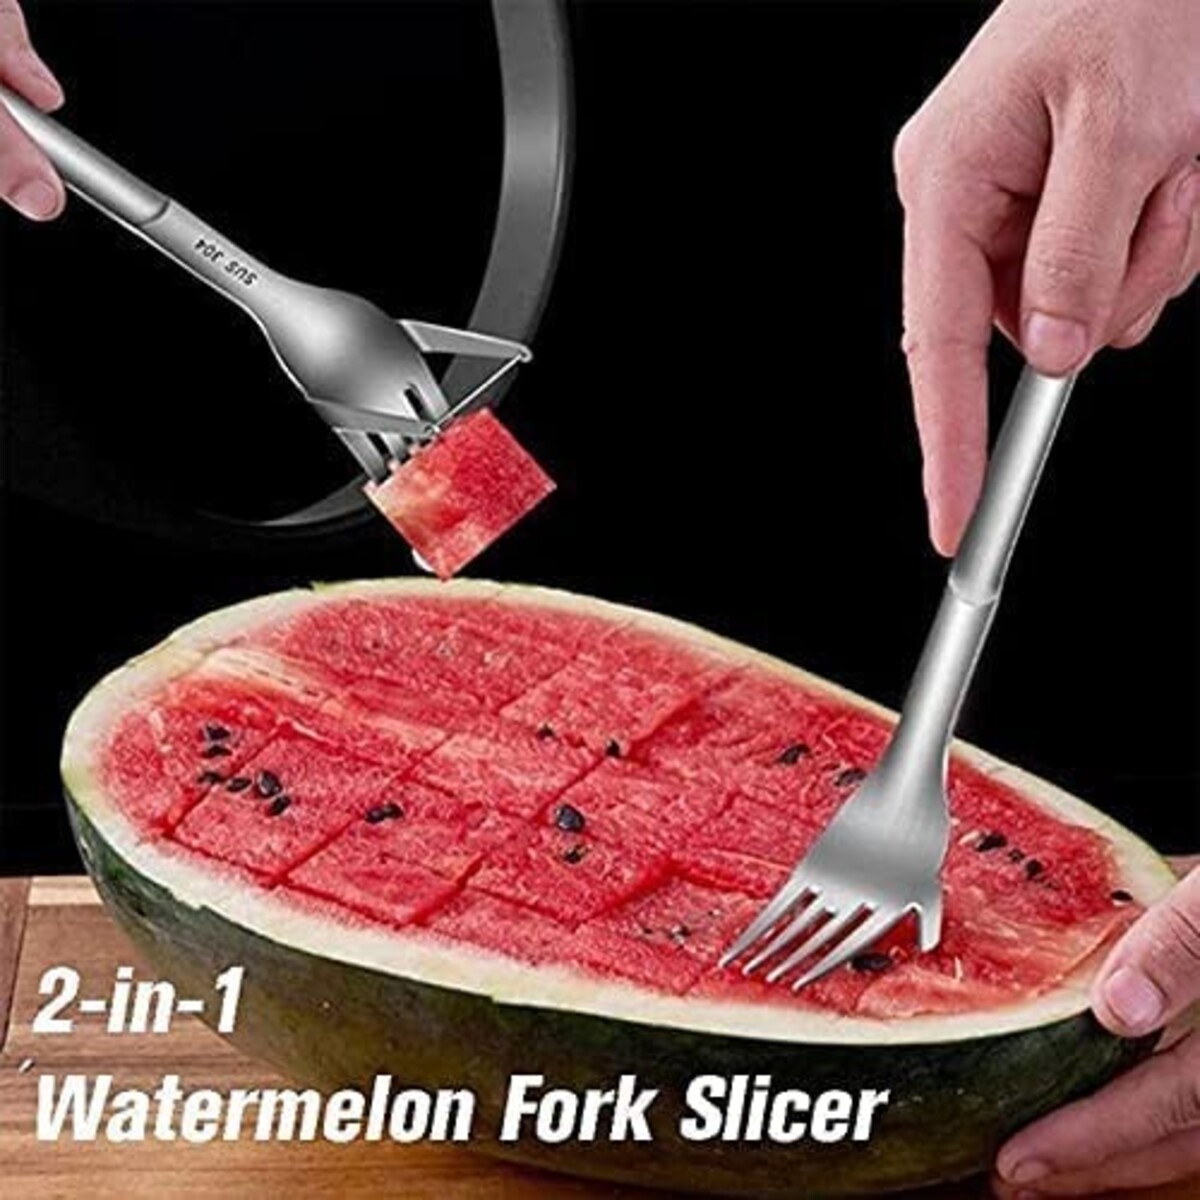 Generic (A)Watermelon Cutter Cutting Tools Steel Fruit Slicer